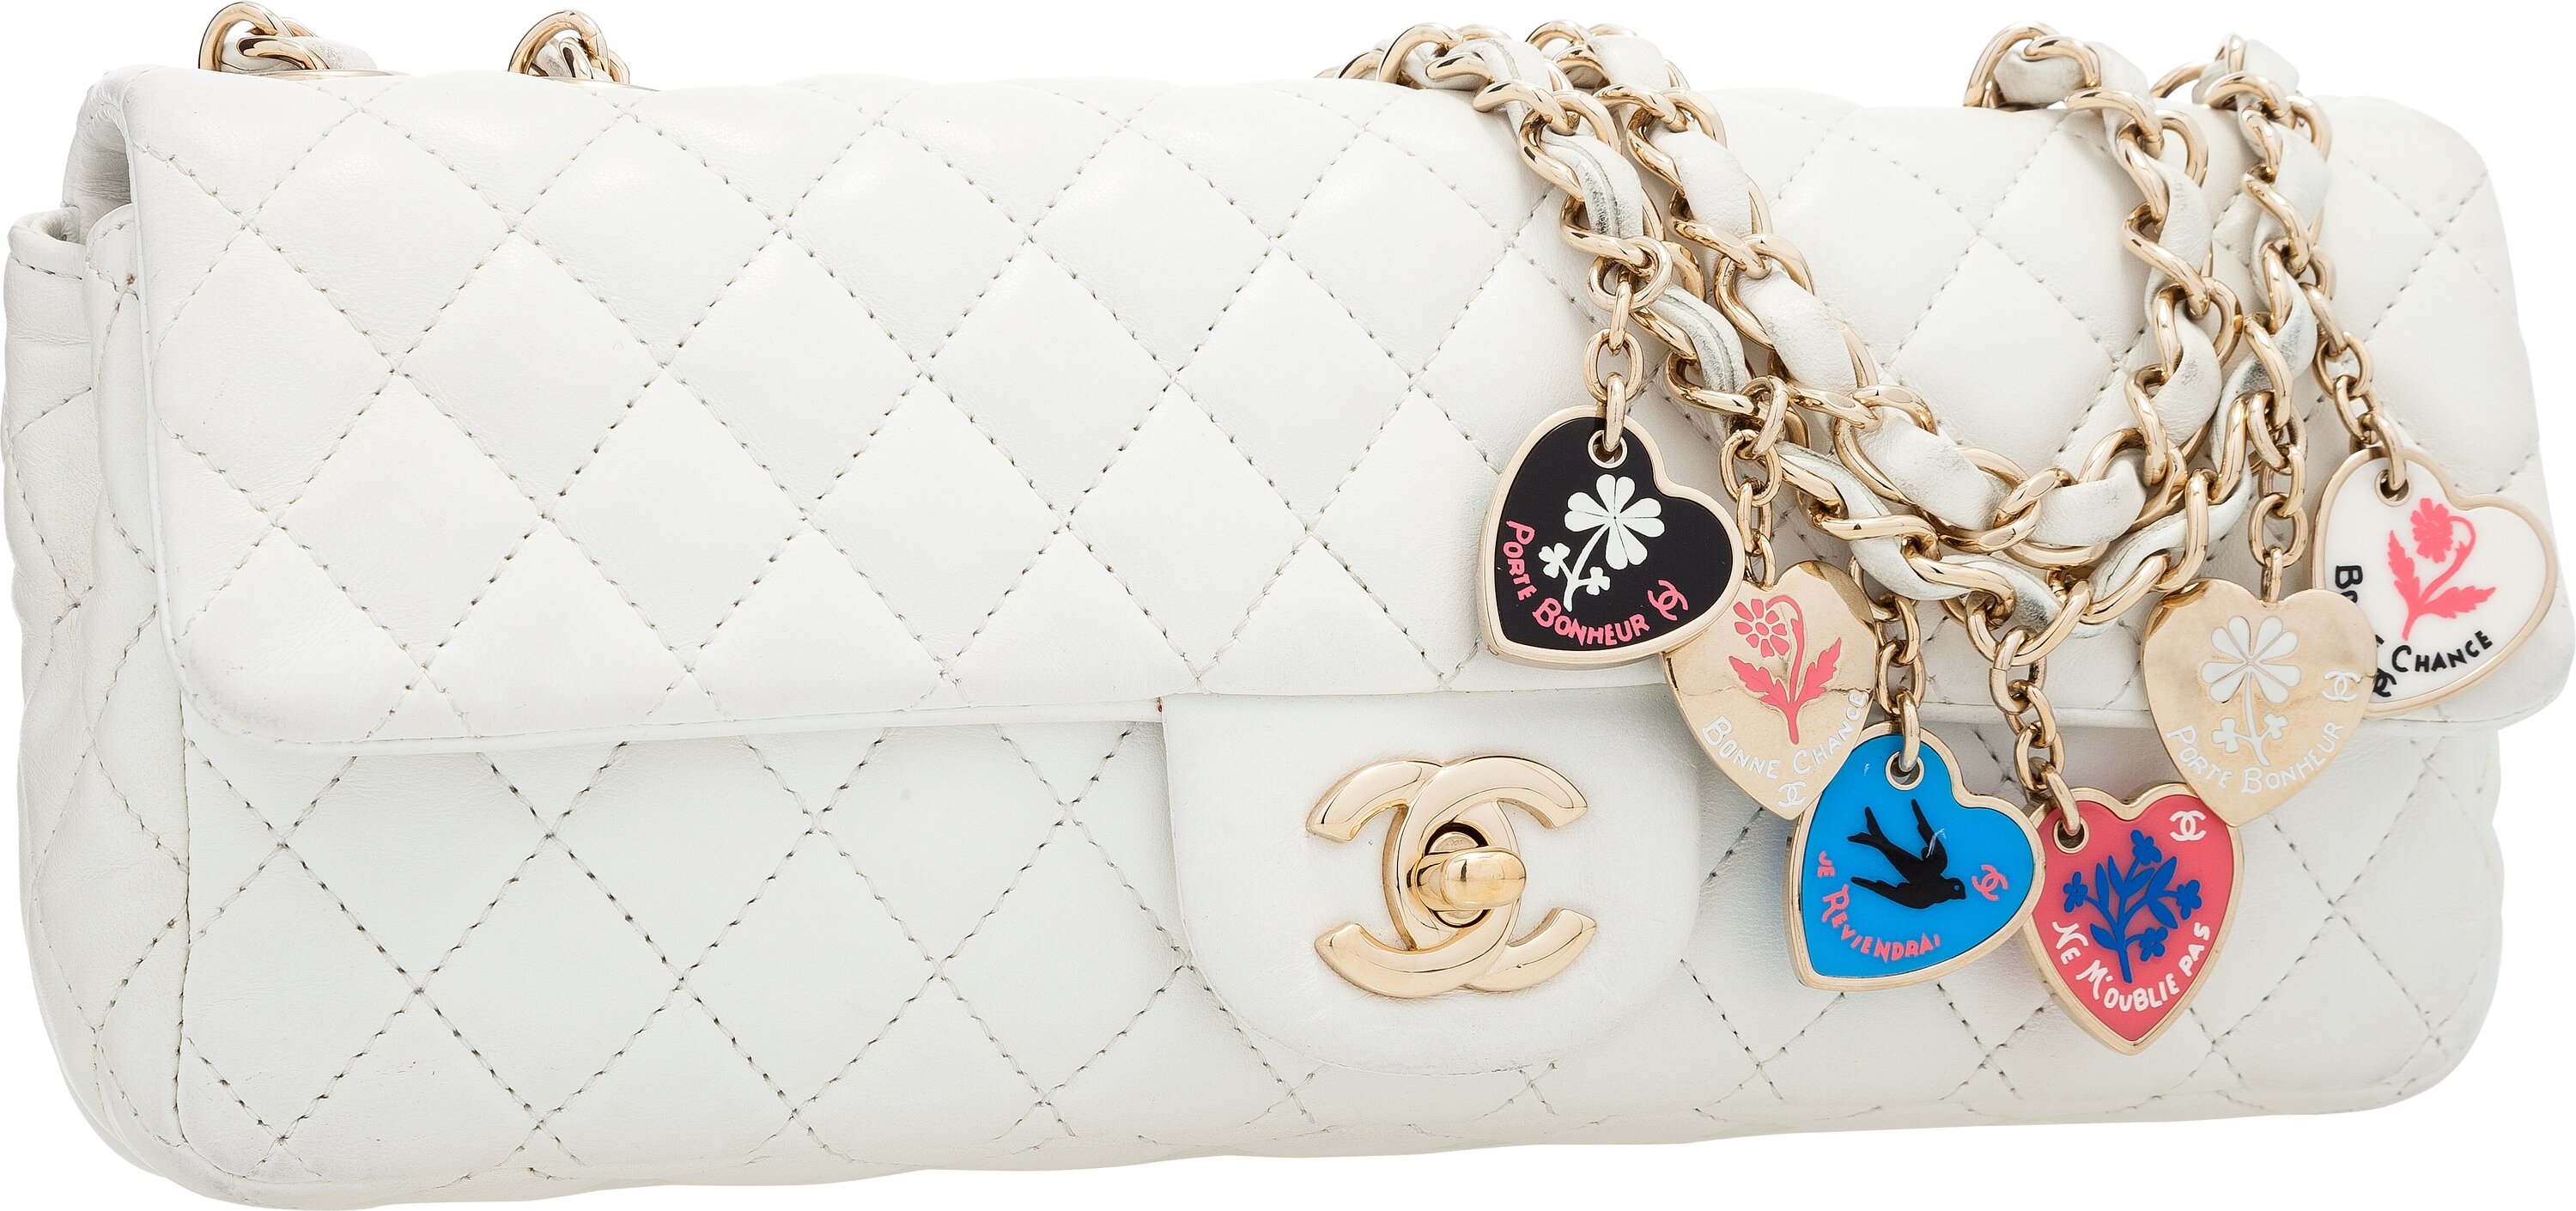 Chanel Limited Edition White Quilted Lambskin Leather East West